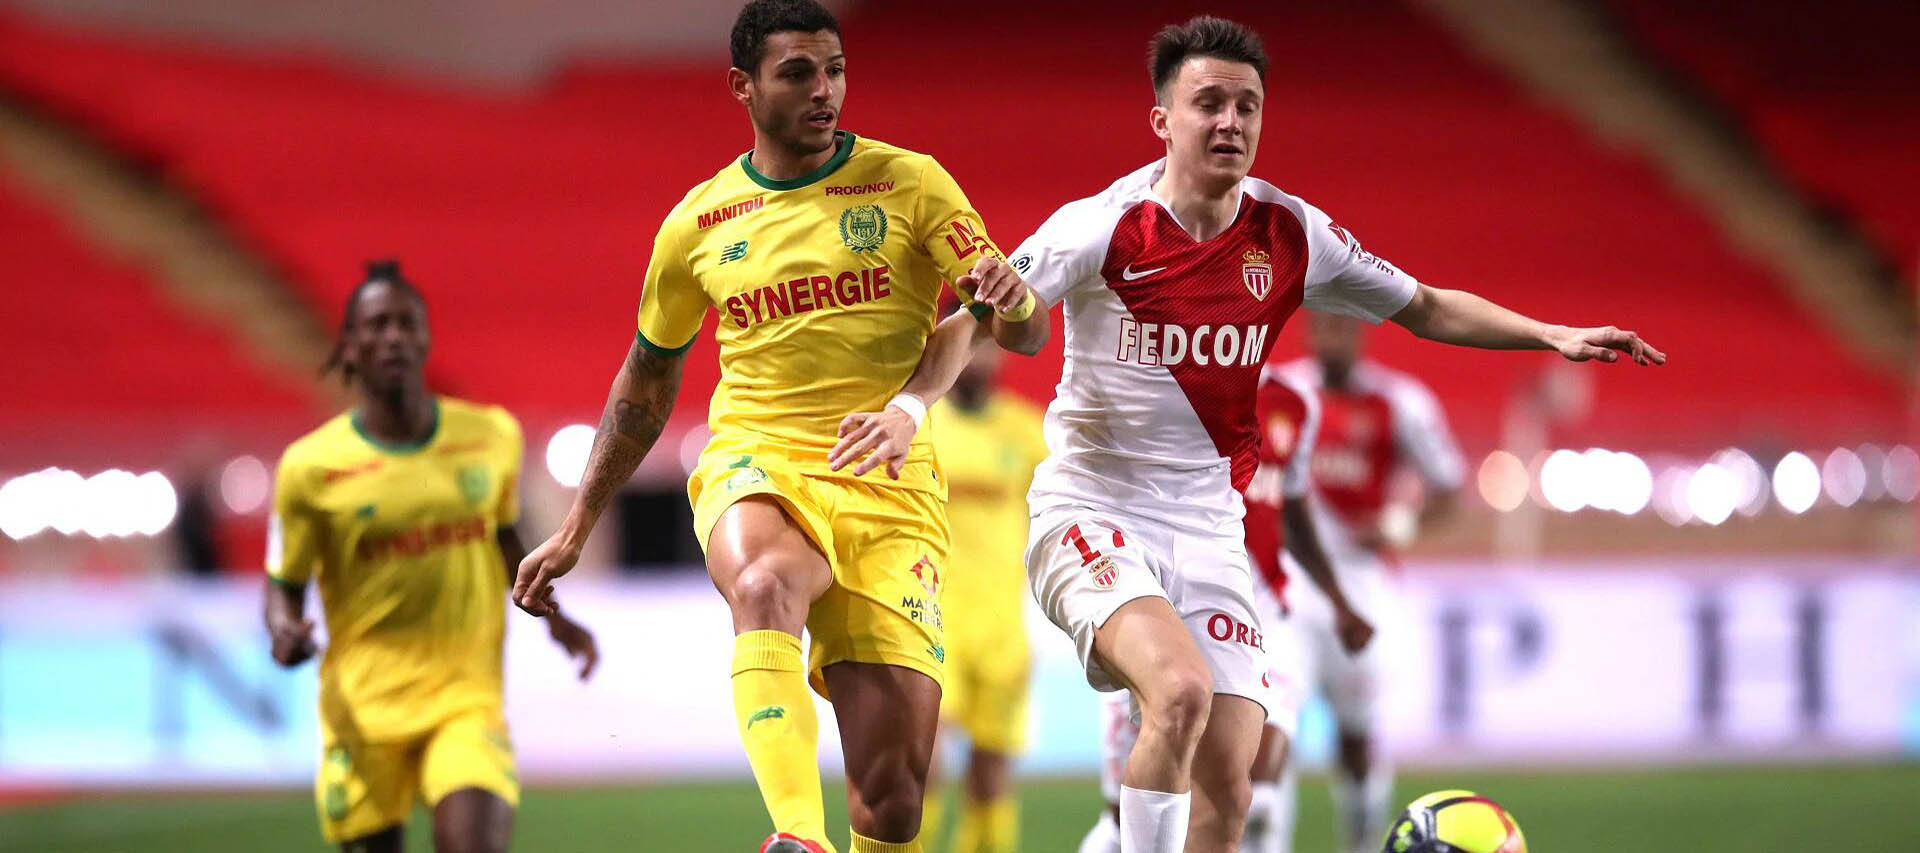 Odds & Betting Preview for the Top Ligue 1 Round 31 Matches